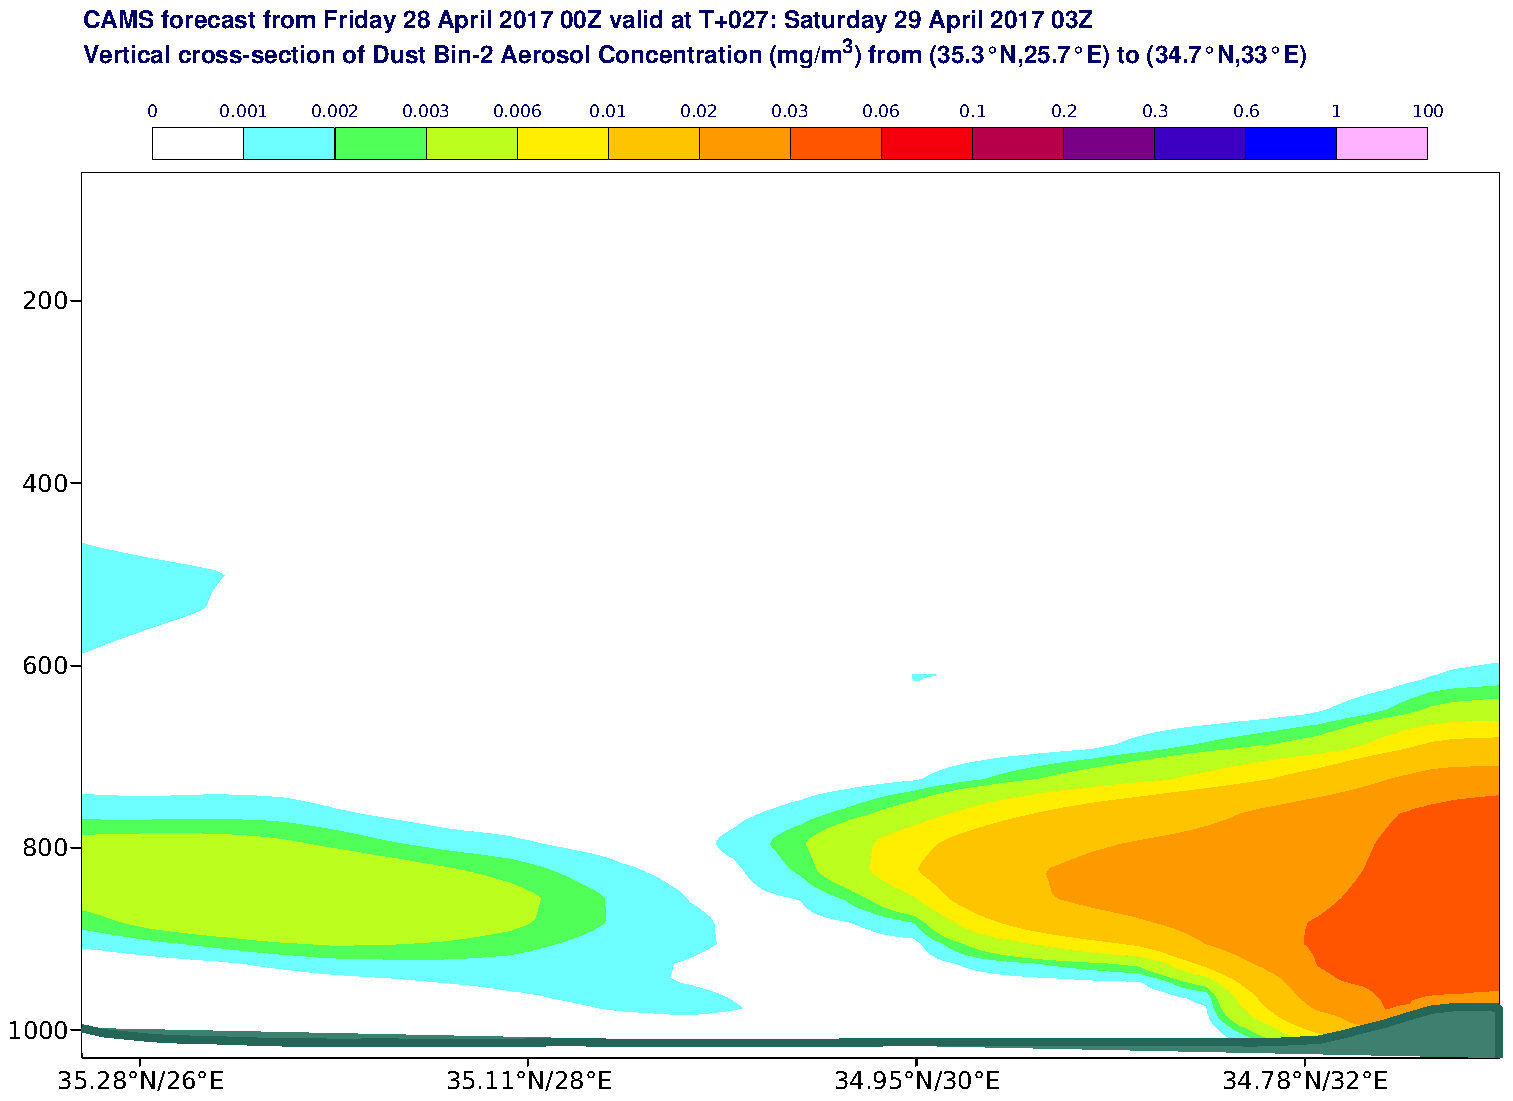 Vertical cross-section of Dust Bin-2 Aerosol Concentration (mg/m3) valid at T27 - 2017-04-29 03:00